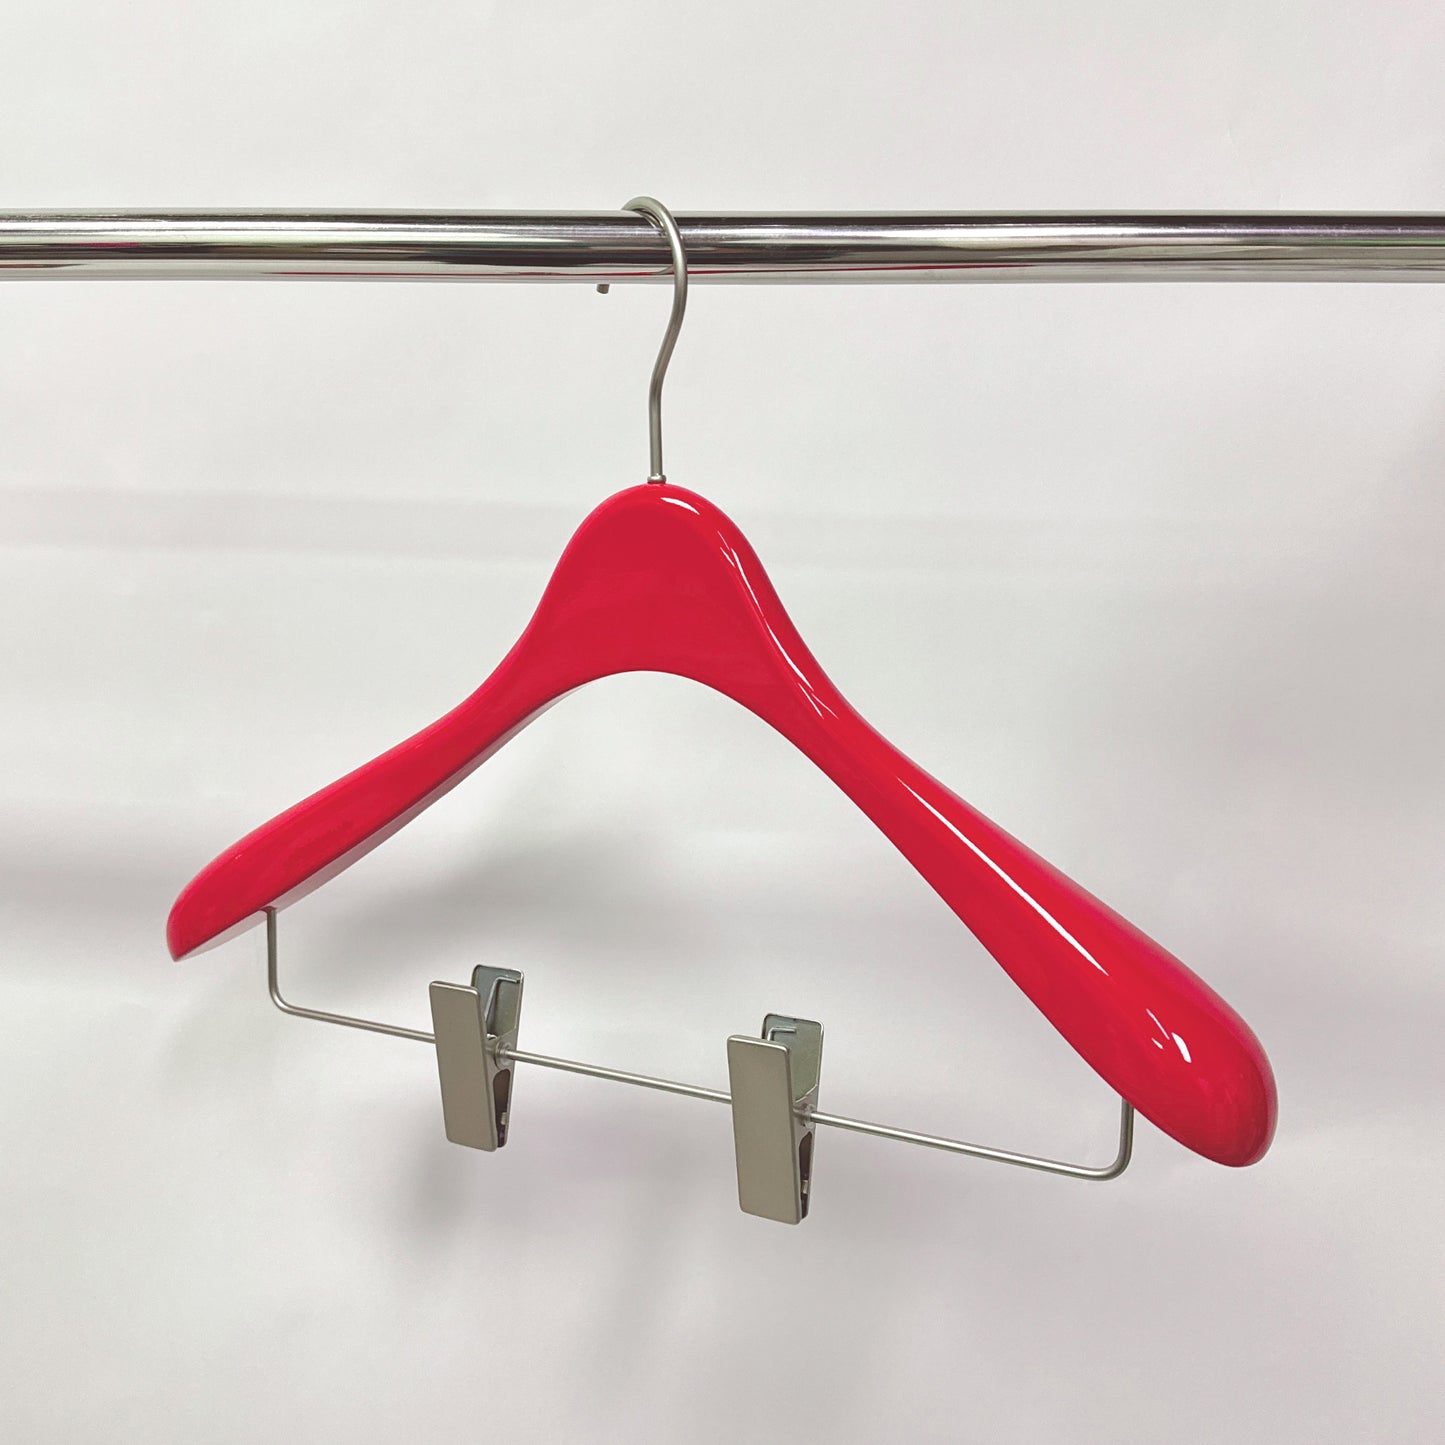 Luxury Wood Hanger, Glossy Red With Silver Pearl Nickle Hook 39*4.5cm, Clothing Rack for Wedding dress bridesmaid jacket dress coat display - De-Liang Dress Forms